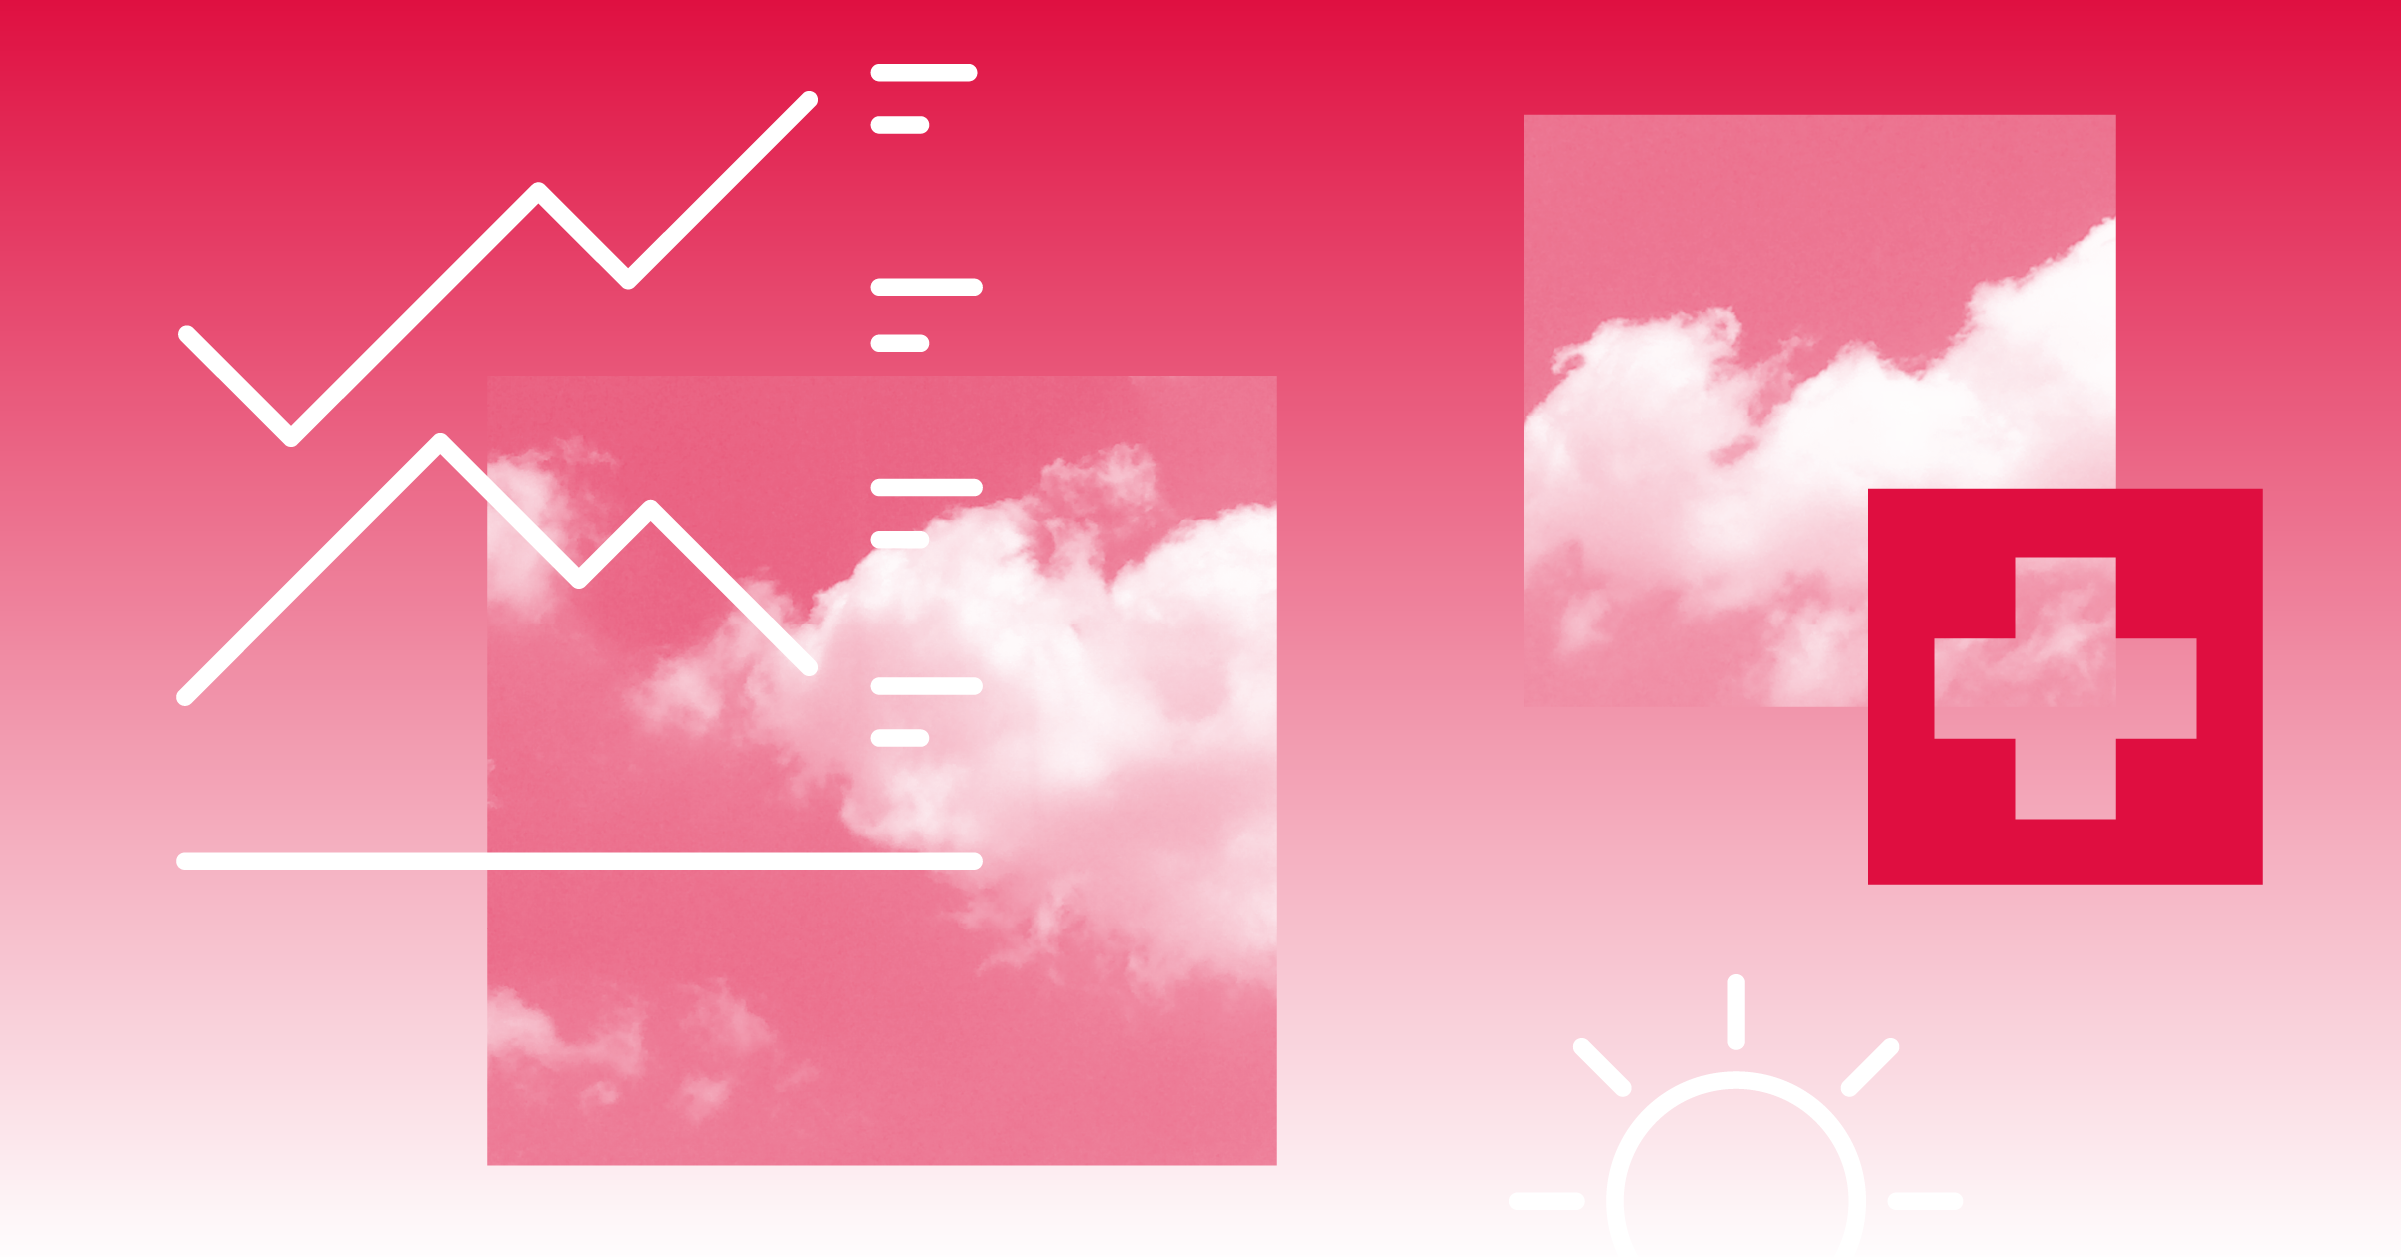 Images of clouds and a stock chart over a red background.